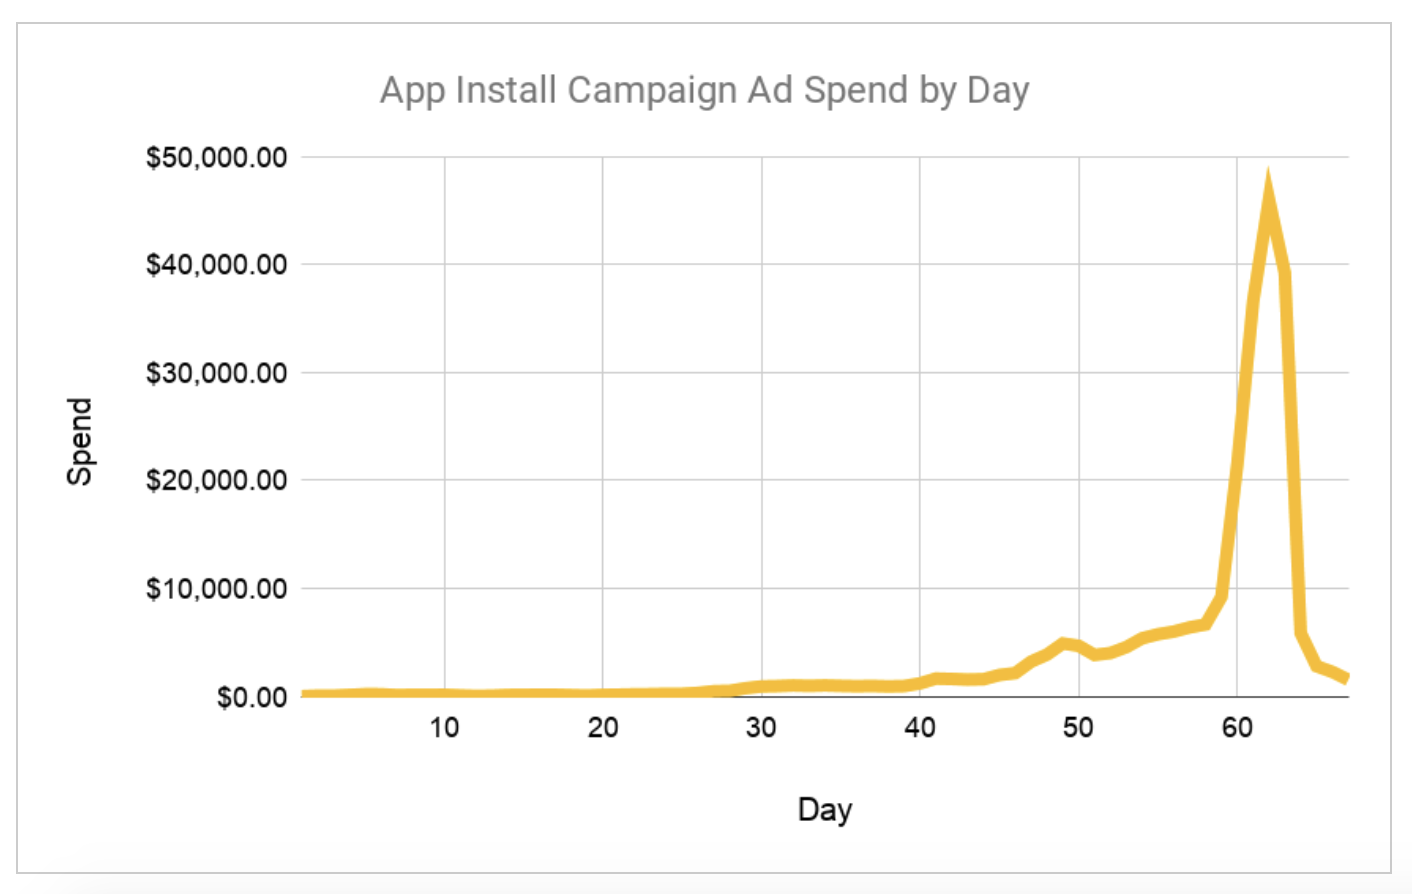 Facebook ad results for install campaigns. 